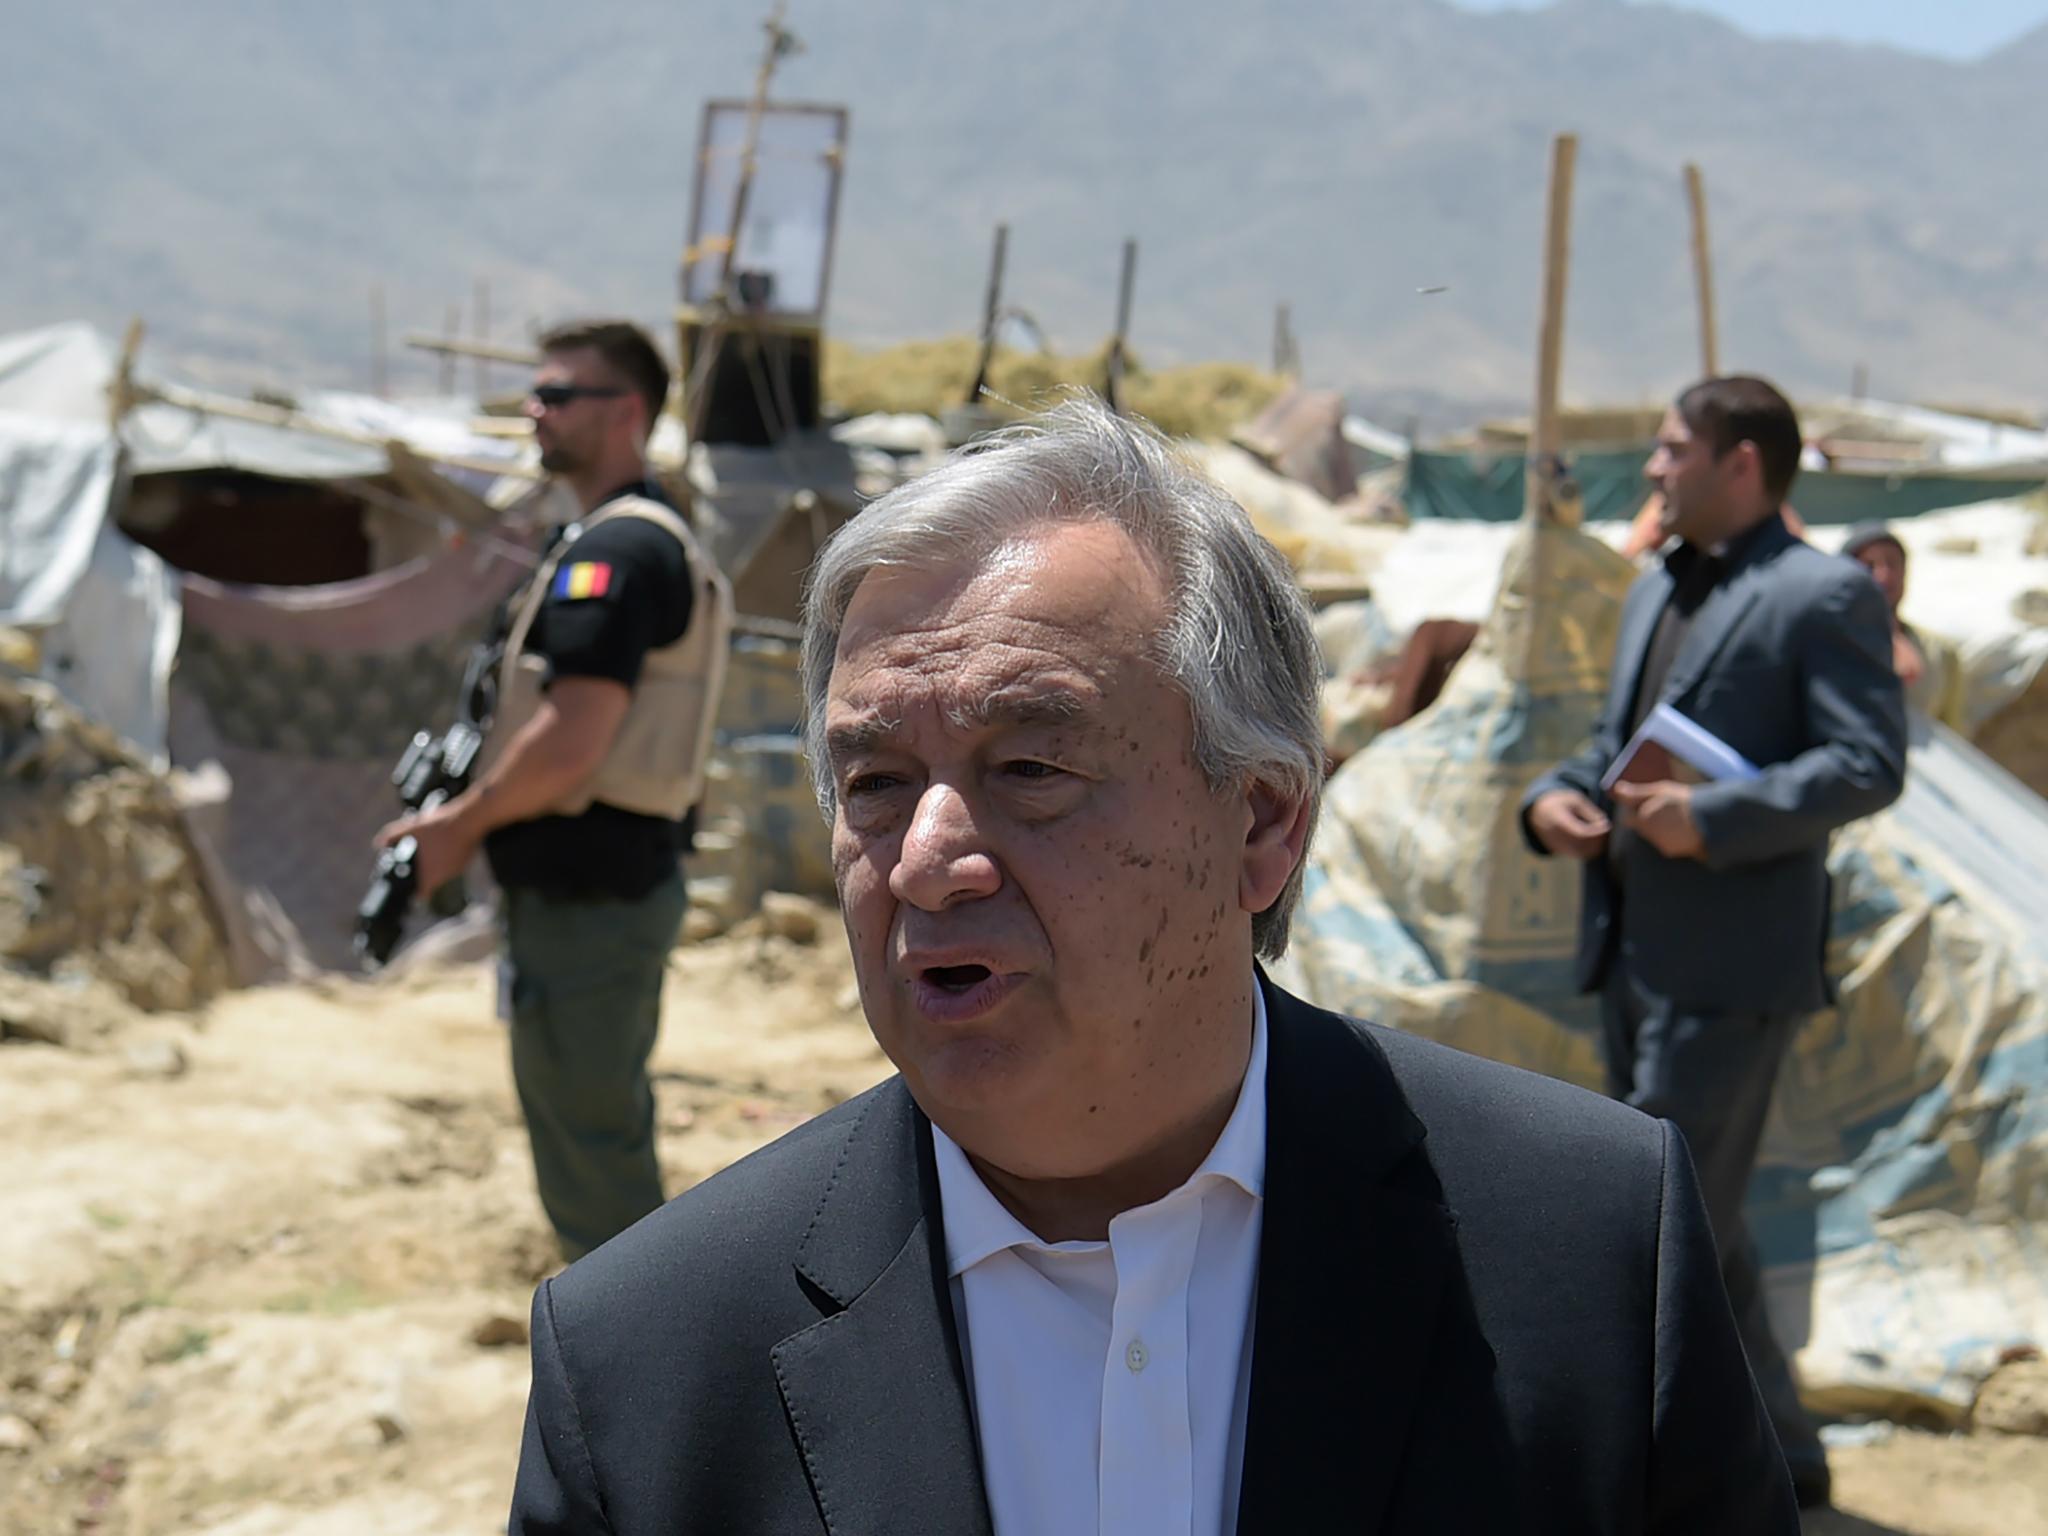 UN Secretary General visits refugees in Afghanistan in June 2017. He is set to appoint a Russian official as the head of a new counter-terrorism division of the world body.